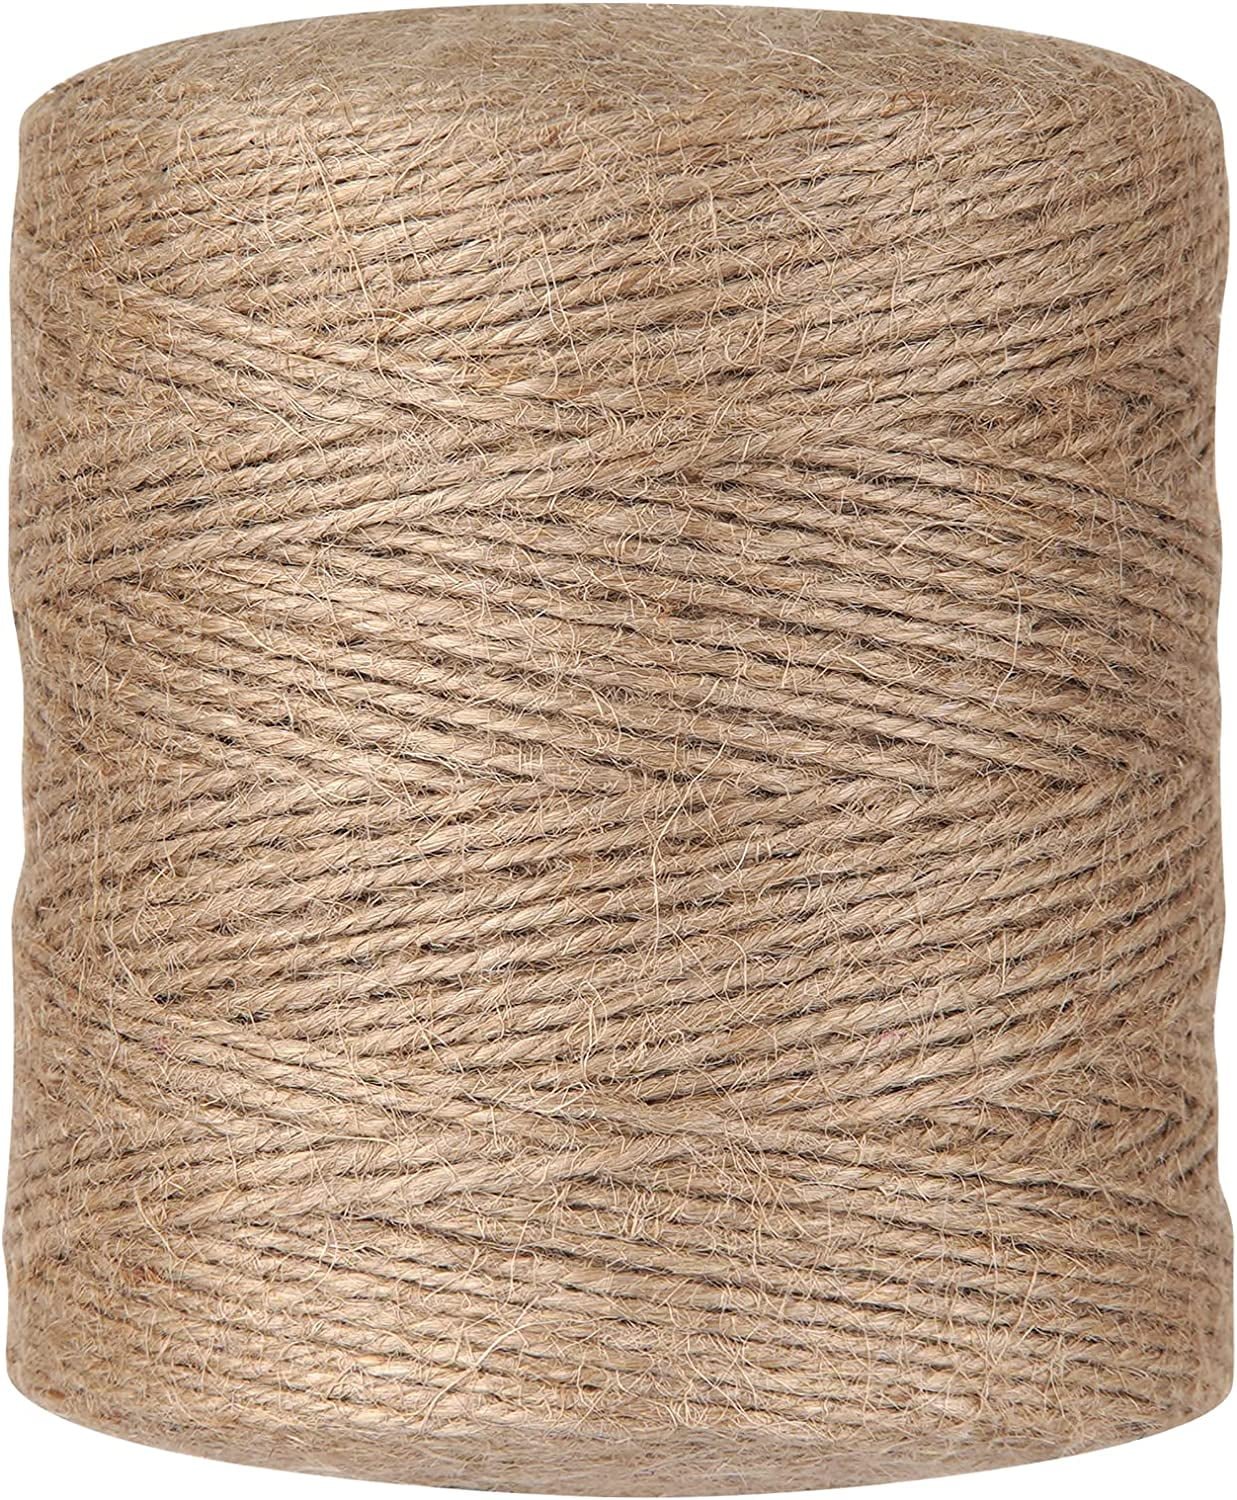 2MM 100M 3 Ply Natural Jute Twine Durable Hemp Rope Gift String Twine –